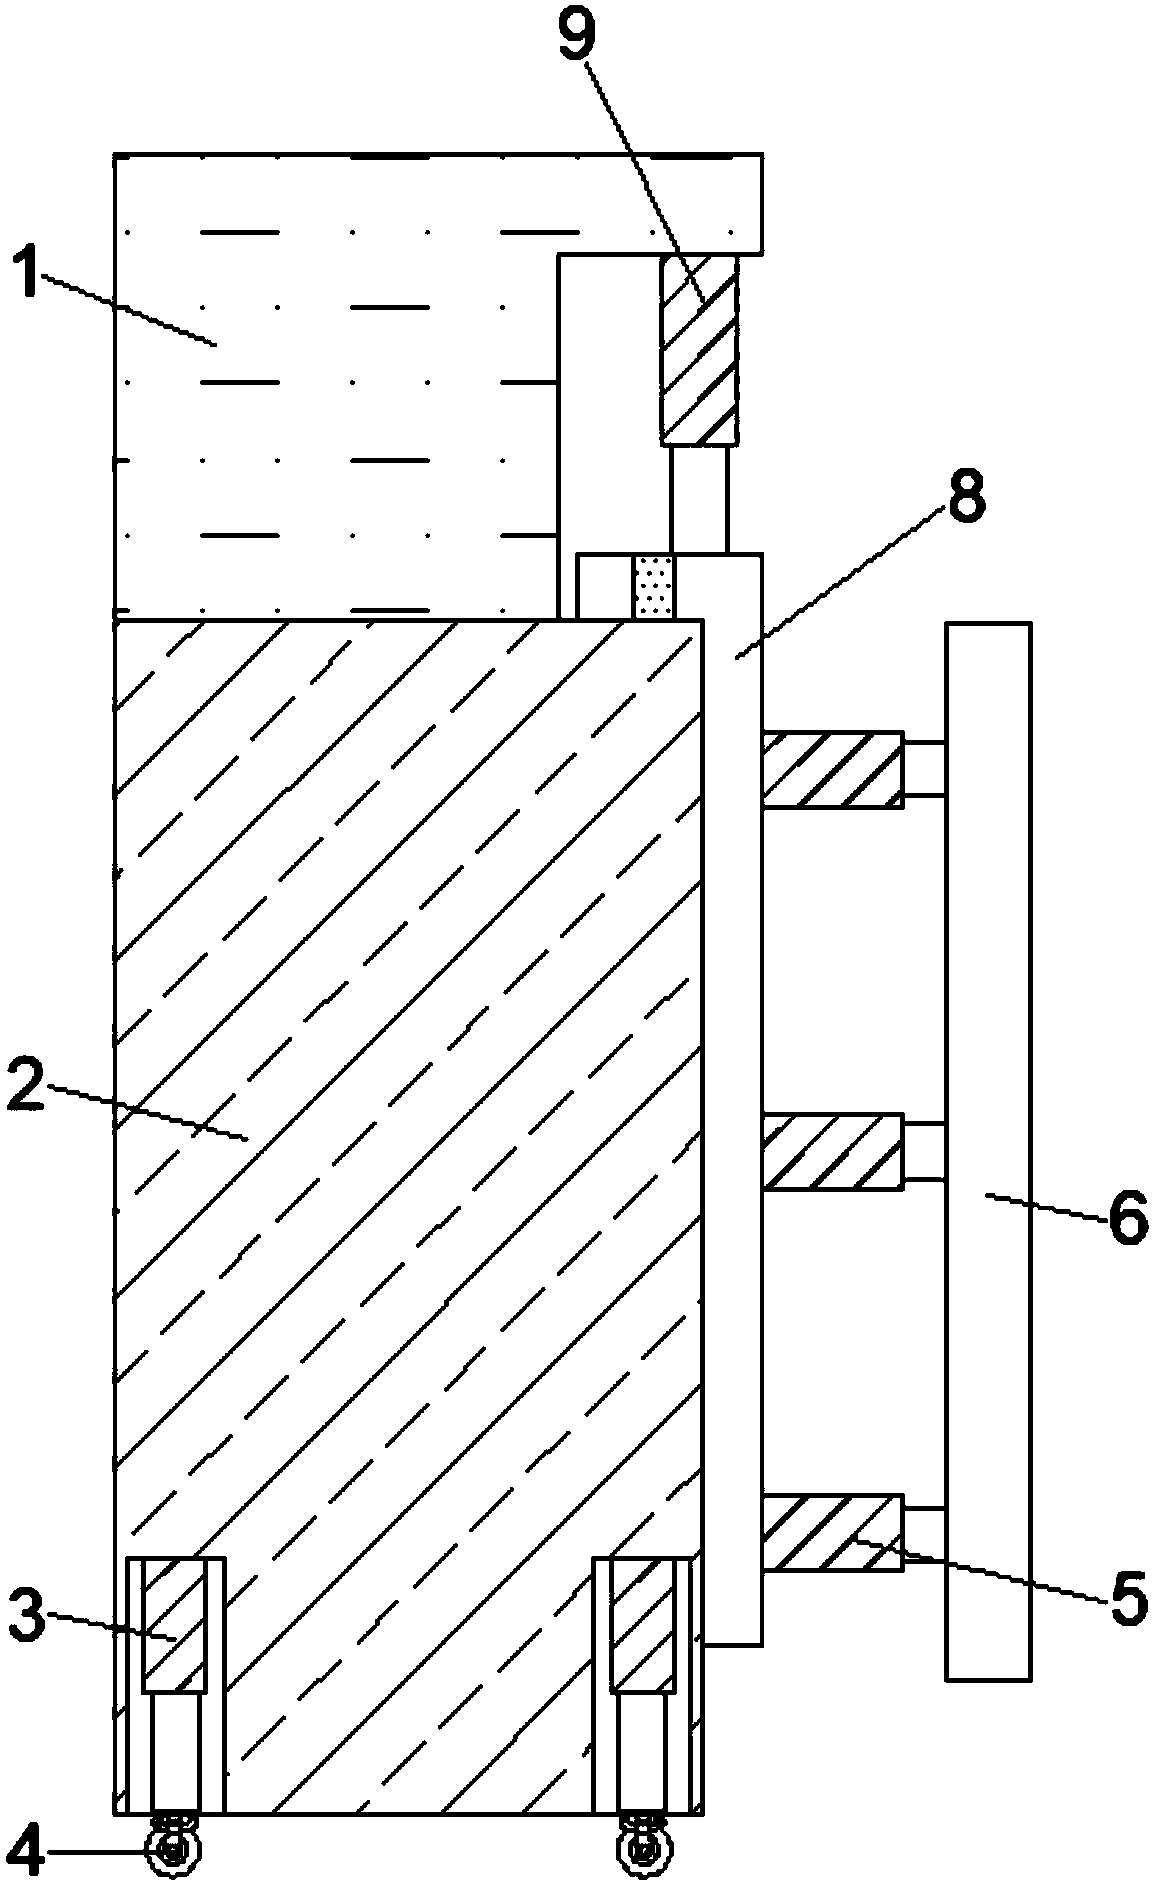 Hydraulic thrust detection device for detecting deformation performance quality of architectural ornament materials